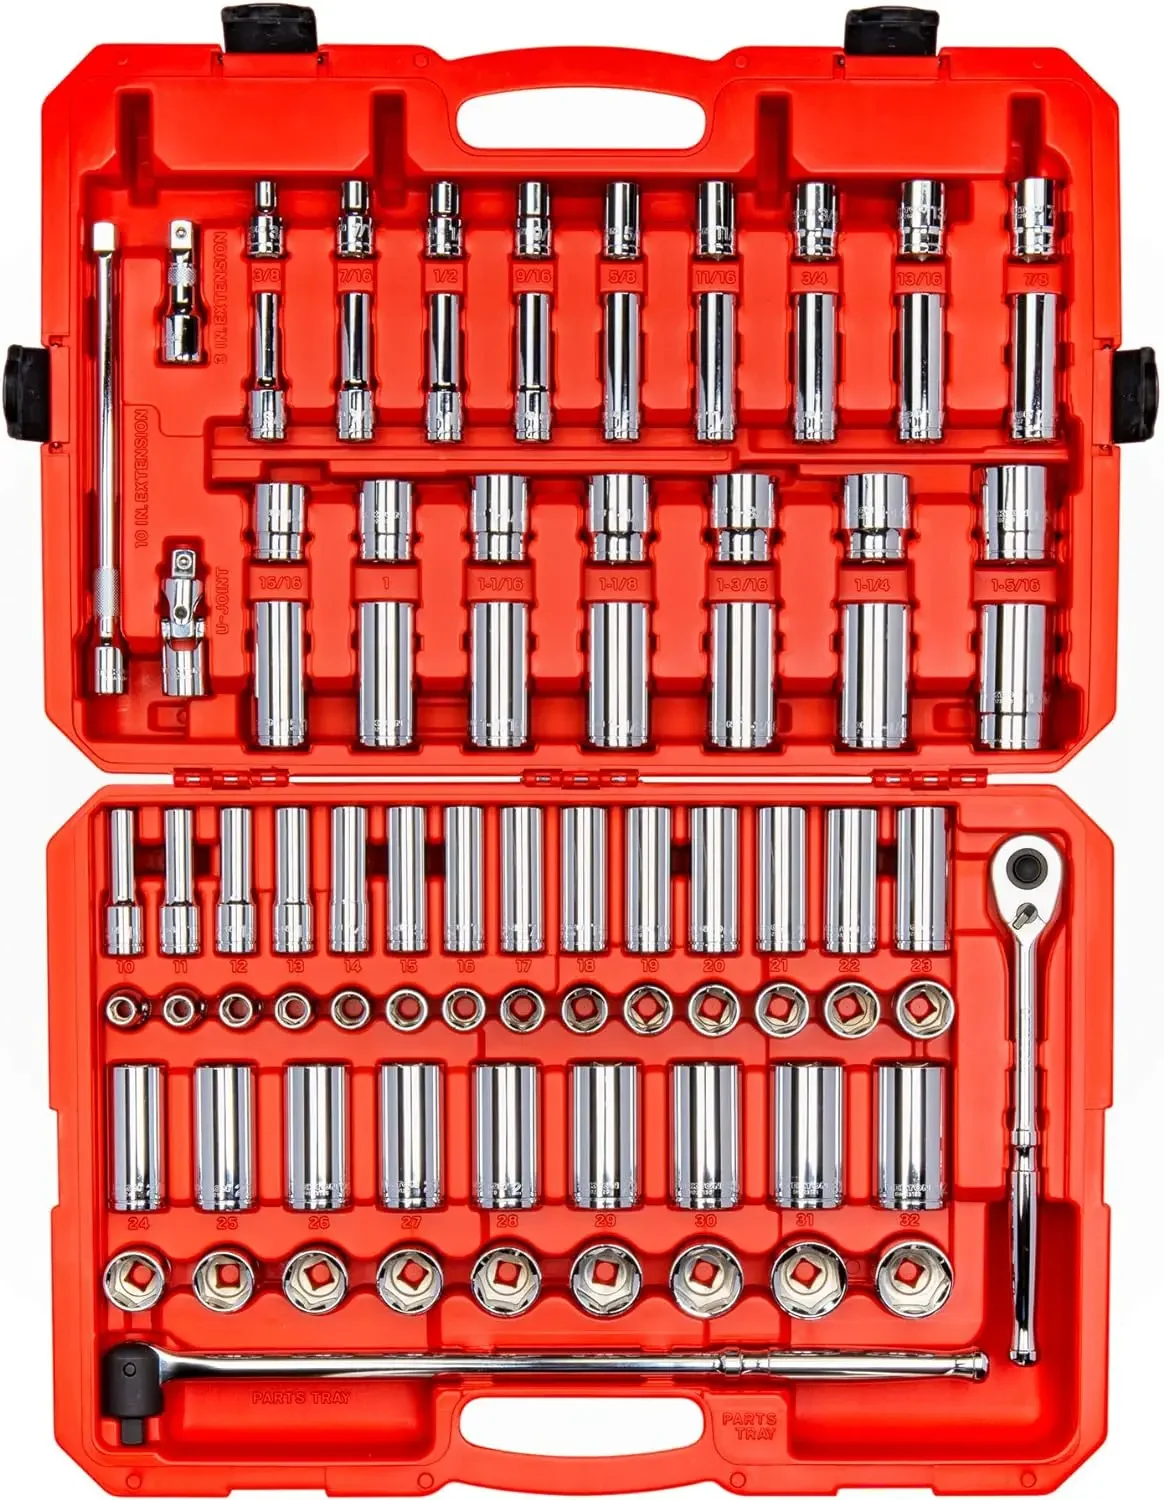 

TEKTON 1/2 Inch Drive 6-Point Socket and Ratchet Set, 83-Piece (3/8 - 1-5/16 in., 10-32 mm) | SKT25302